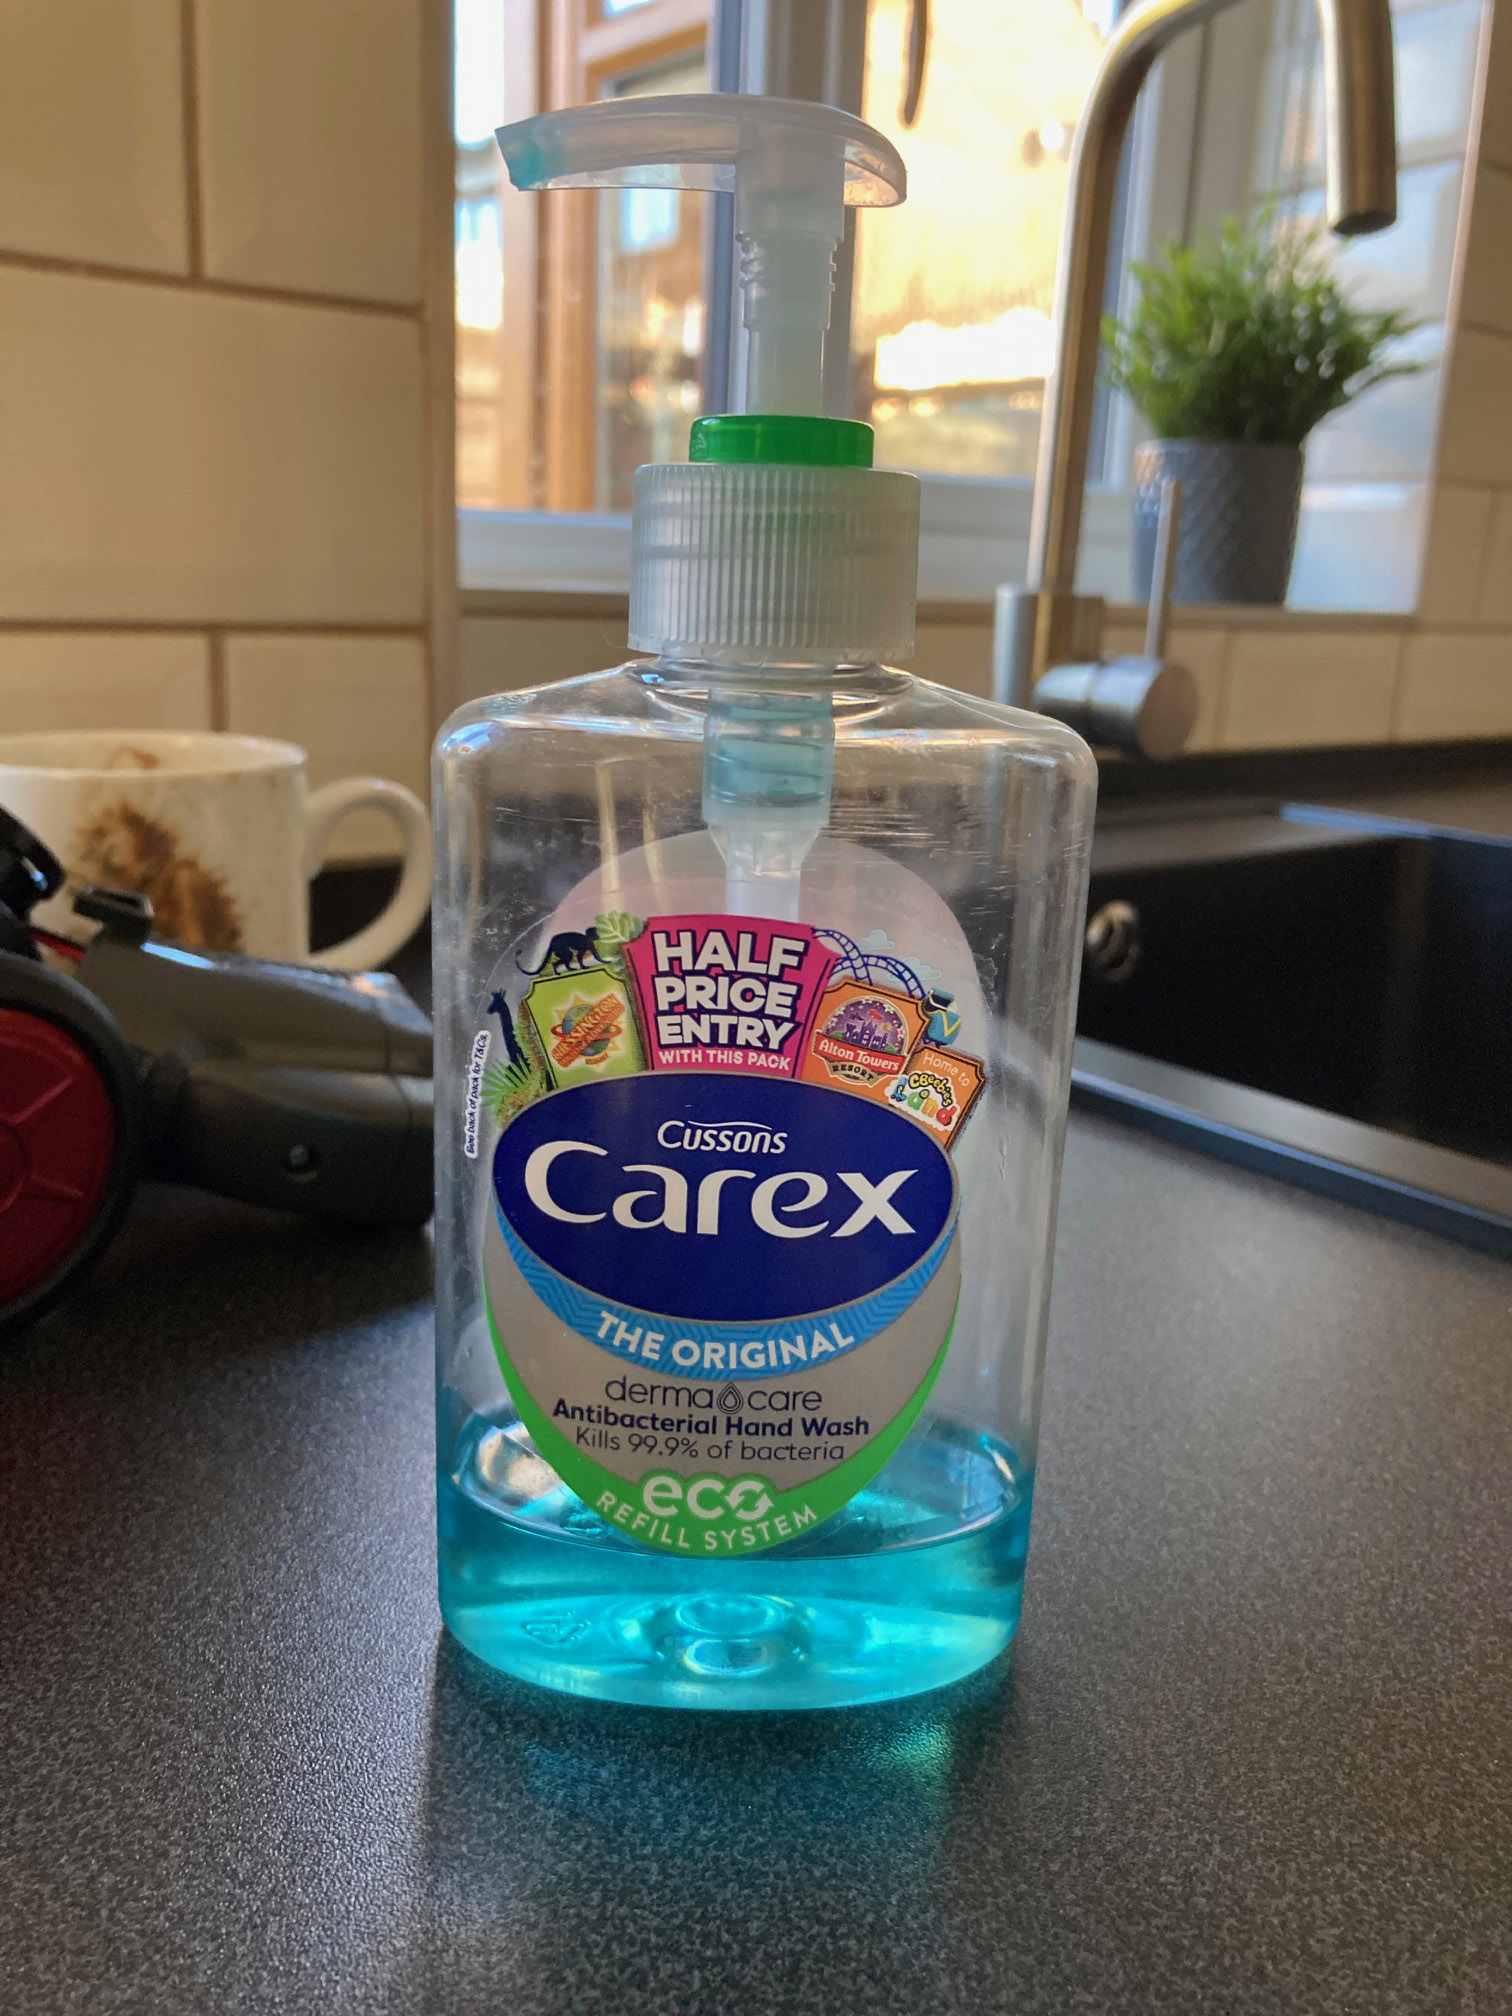 Cussons Carex complaint 15to 20% of product left in container